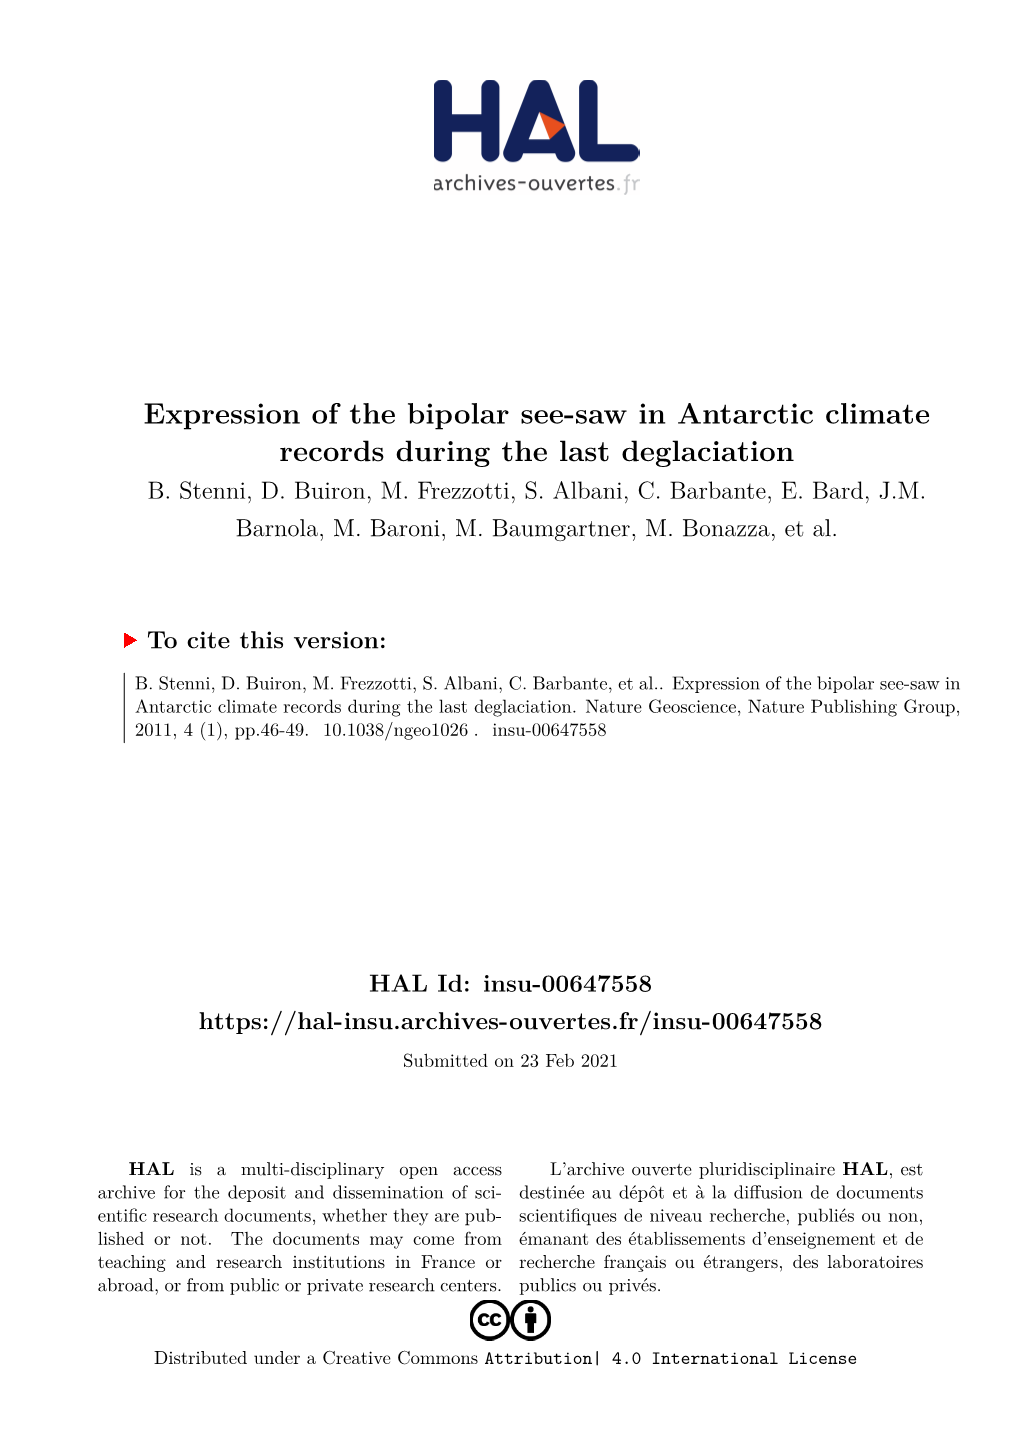 Expression of the Bipolar See-Saw in Antarctic Climate Records During the Last Deglaciation B